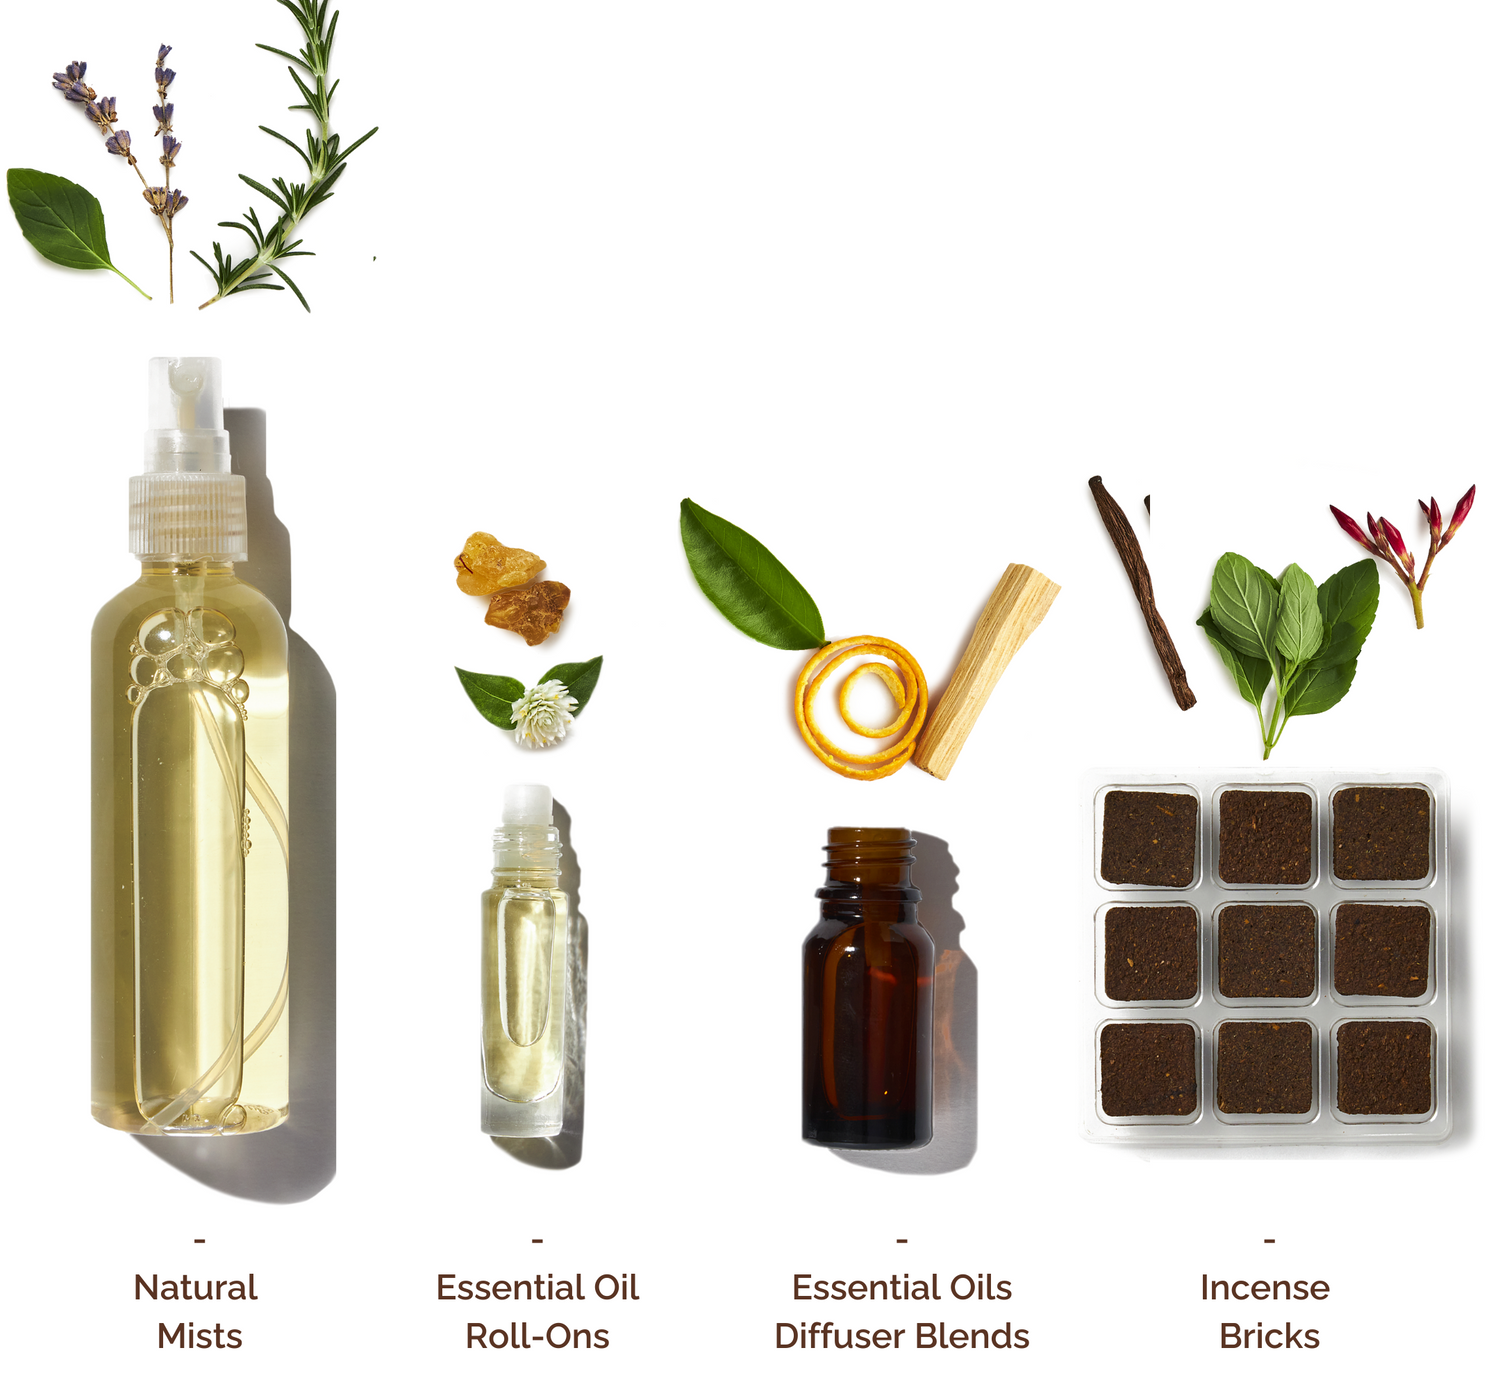 Scent-sational Aromatherapy in every form